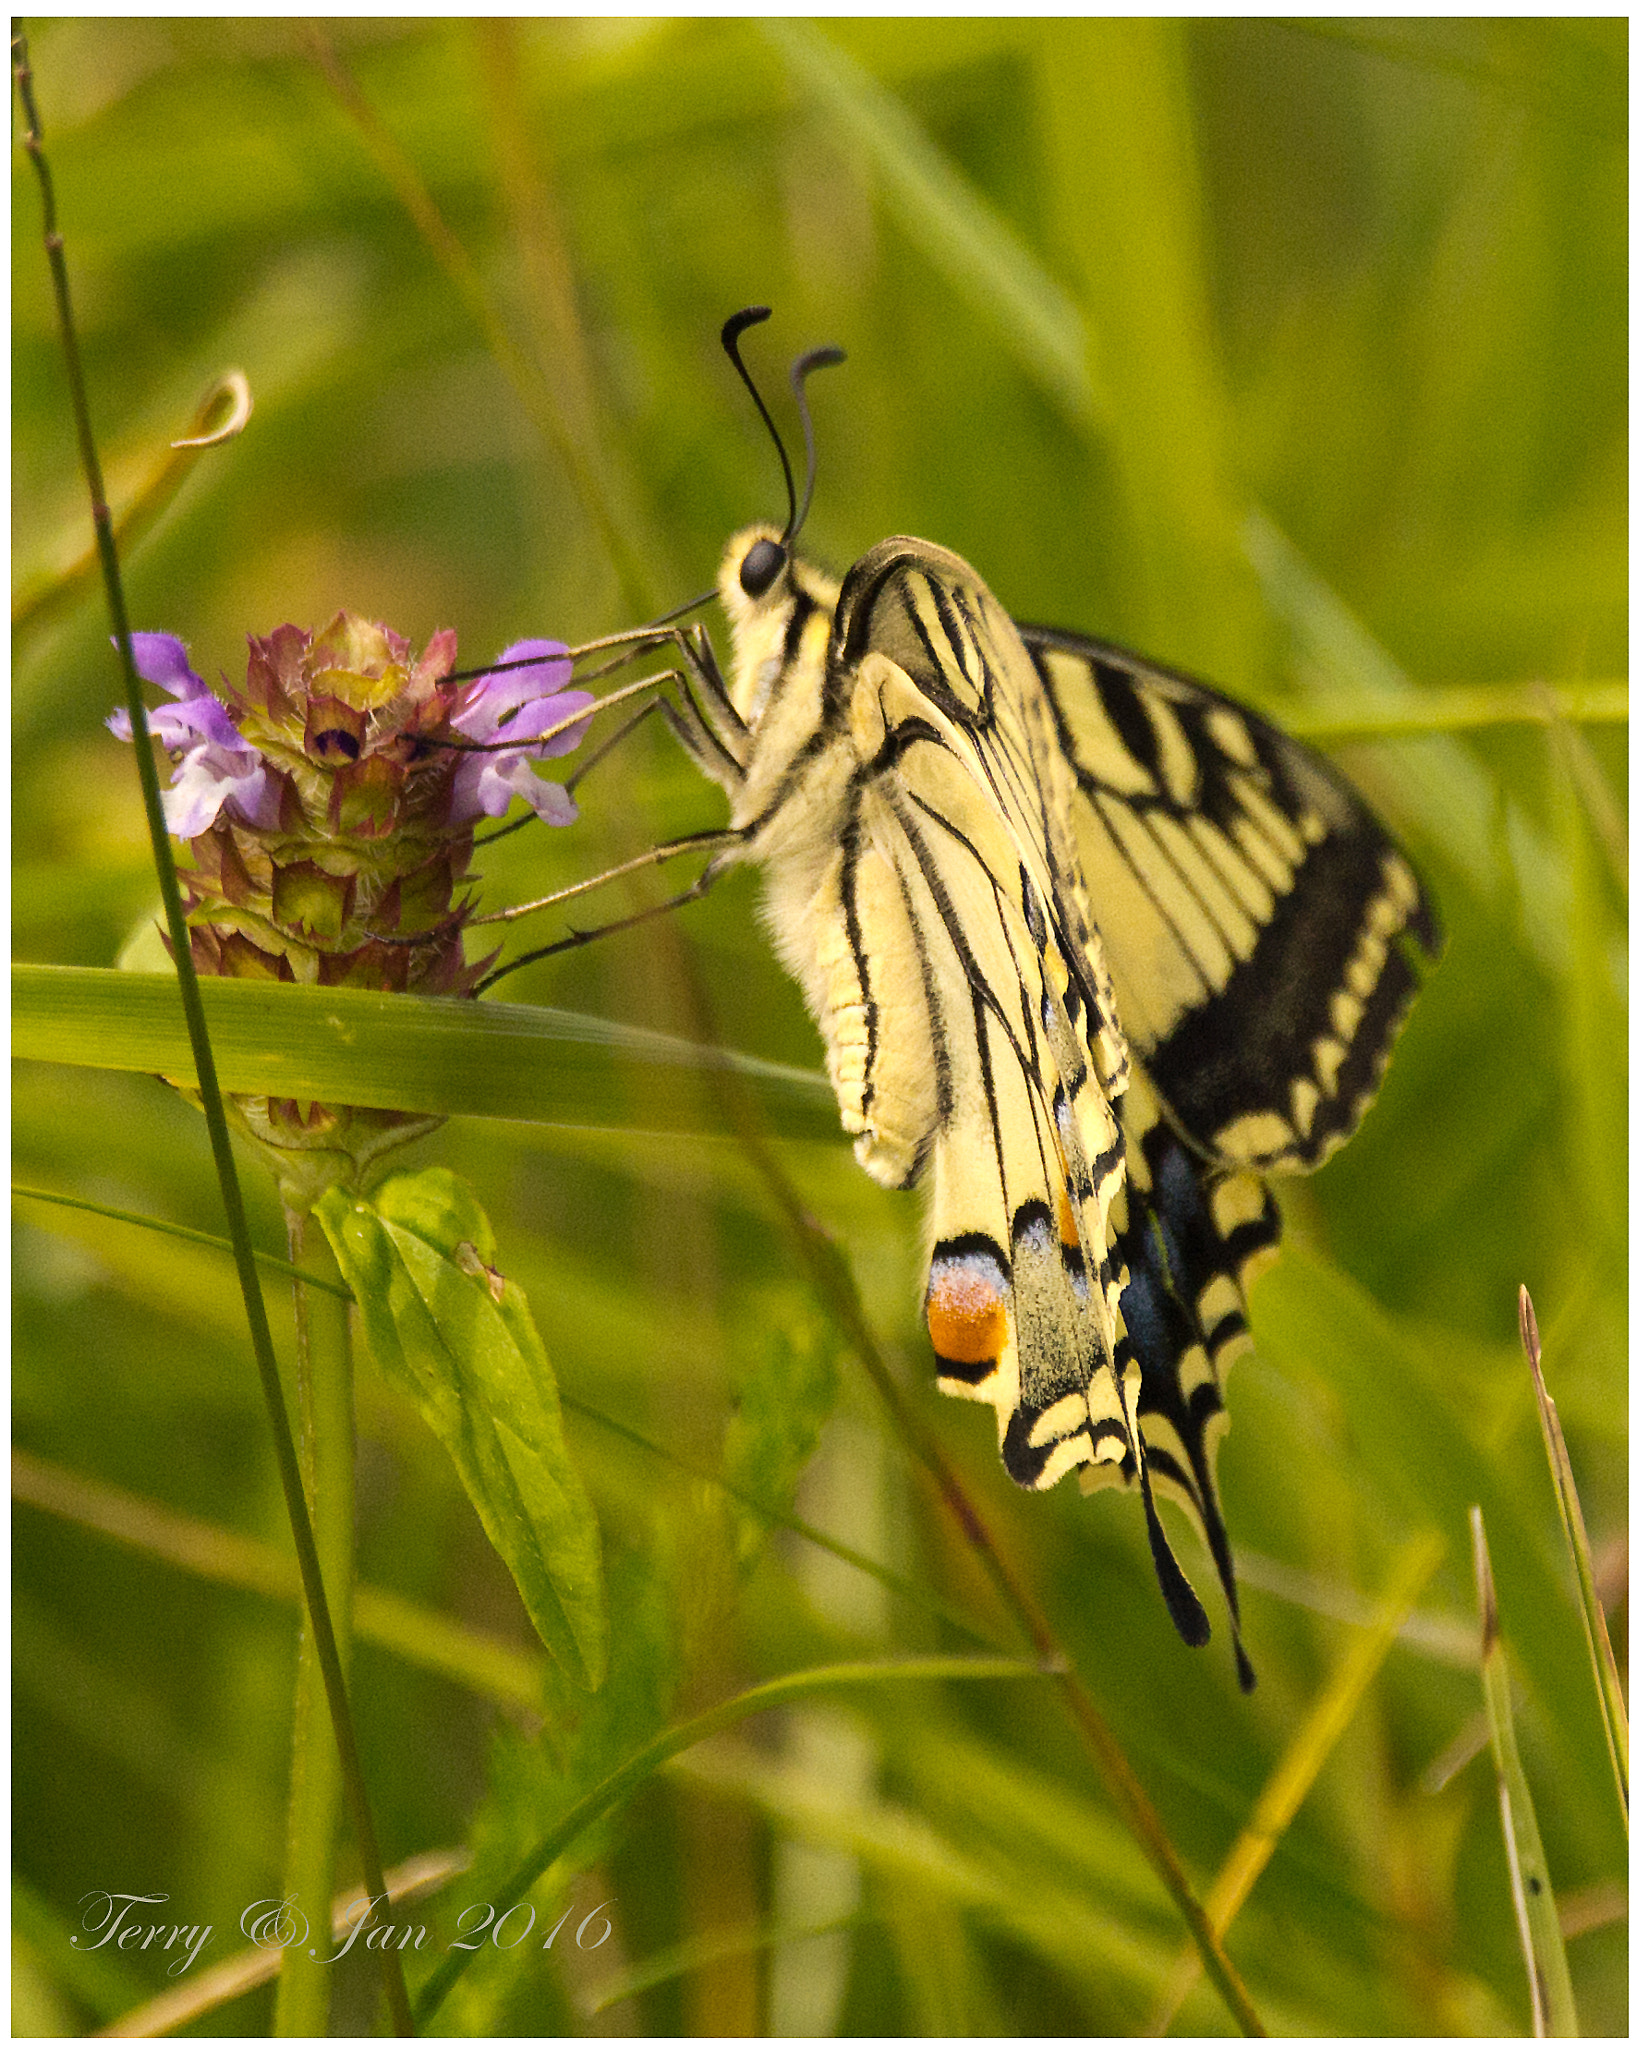 Nikon D3100 + Sigma 150-600mm F5-6.3 DG OS HSM | C sample photo. Swallowtail butterfly photography